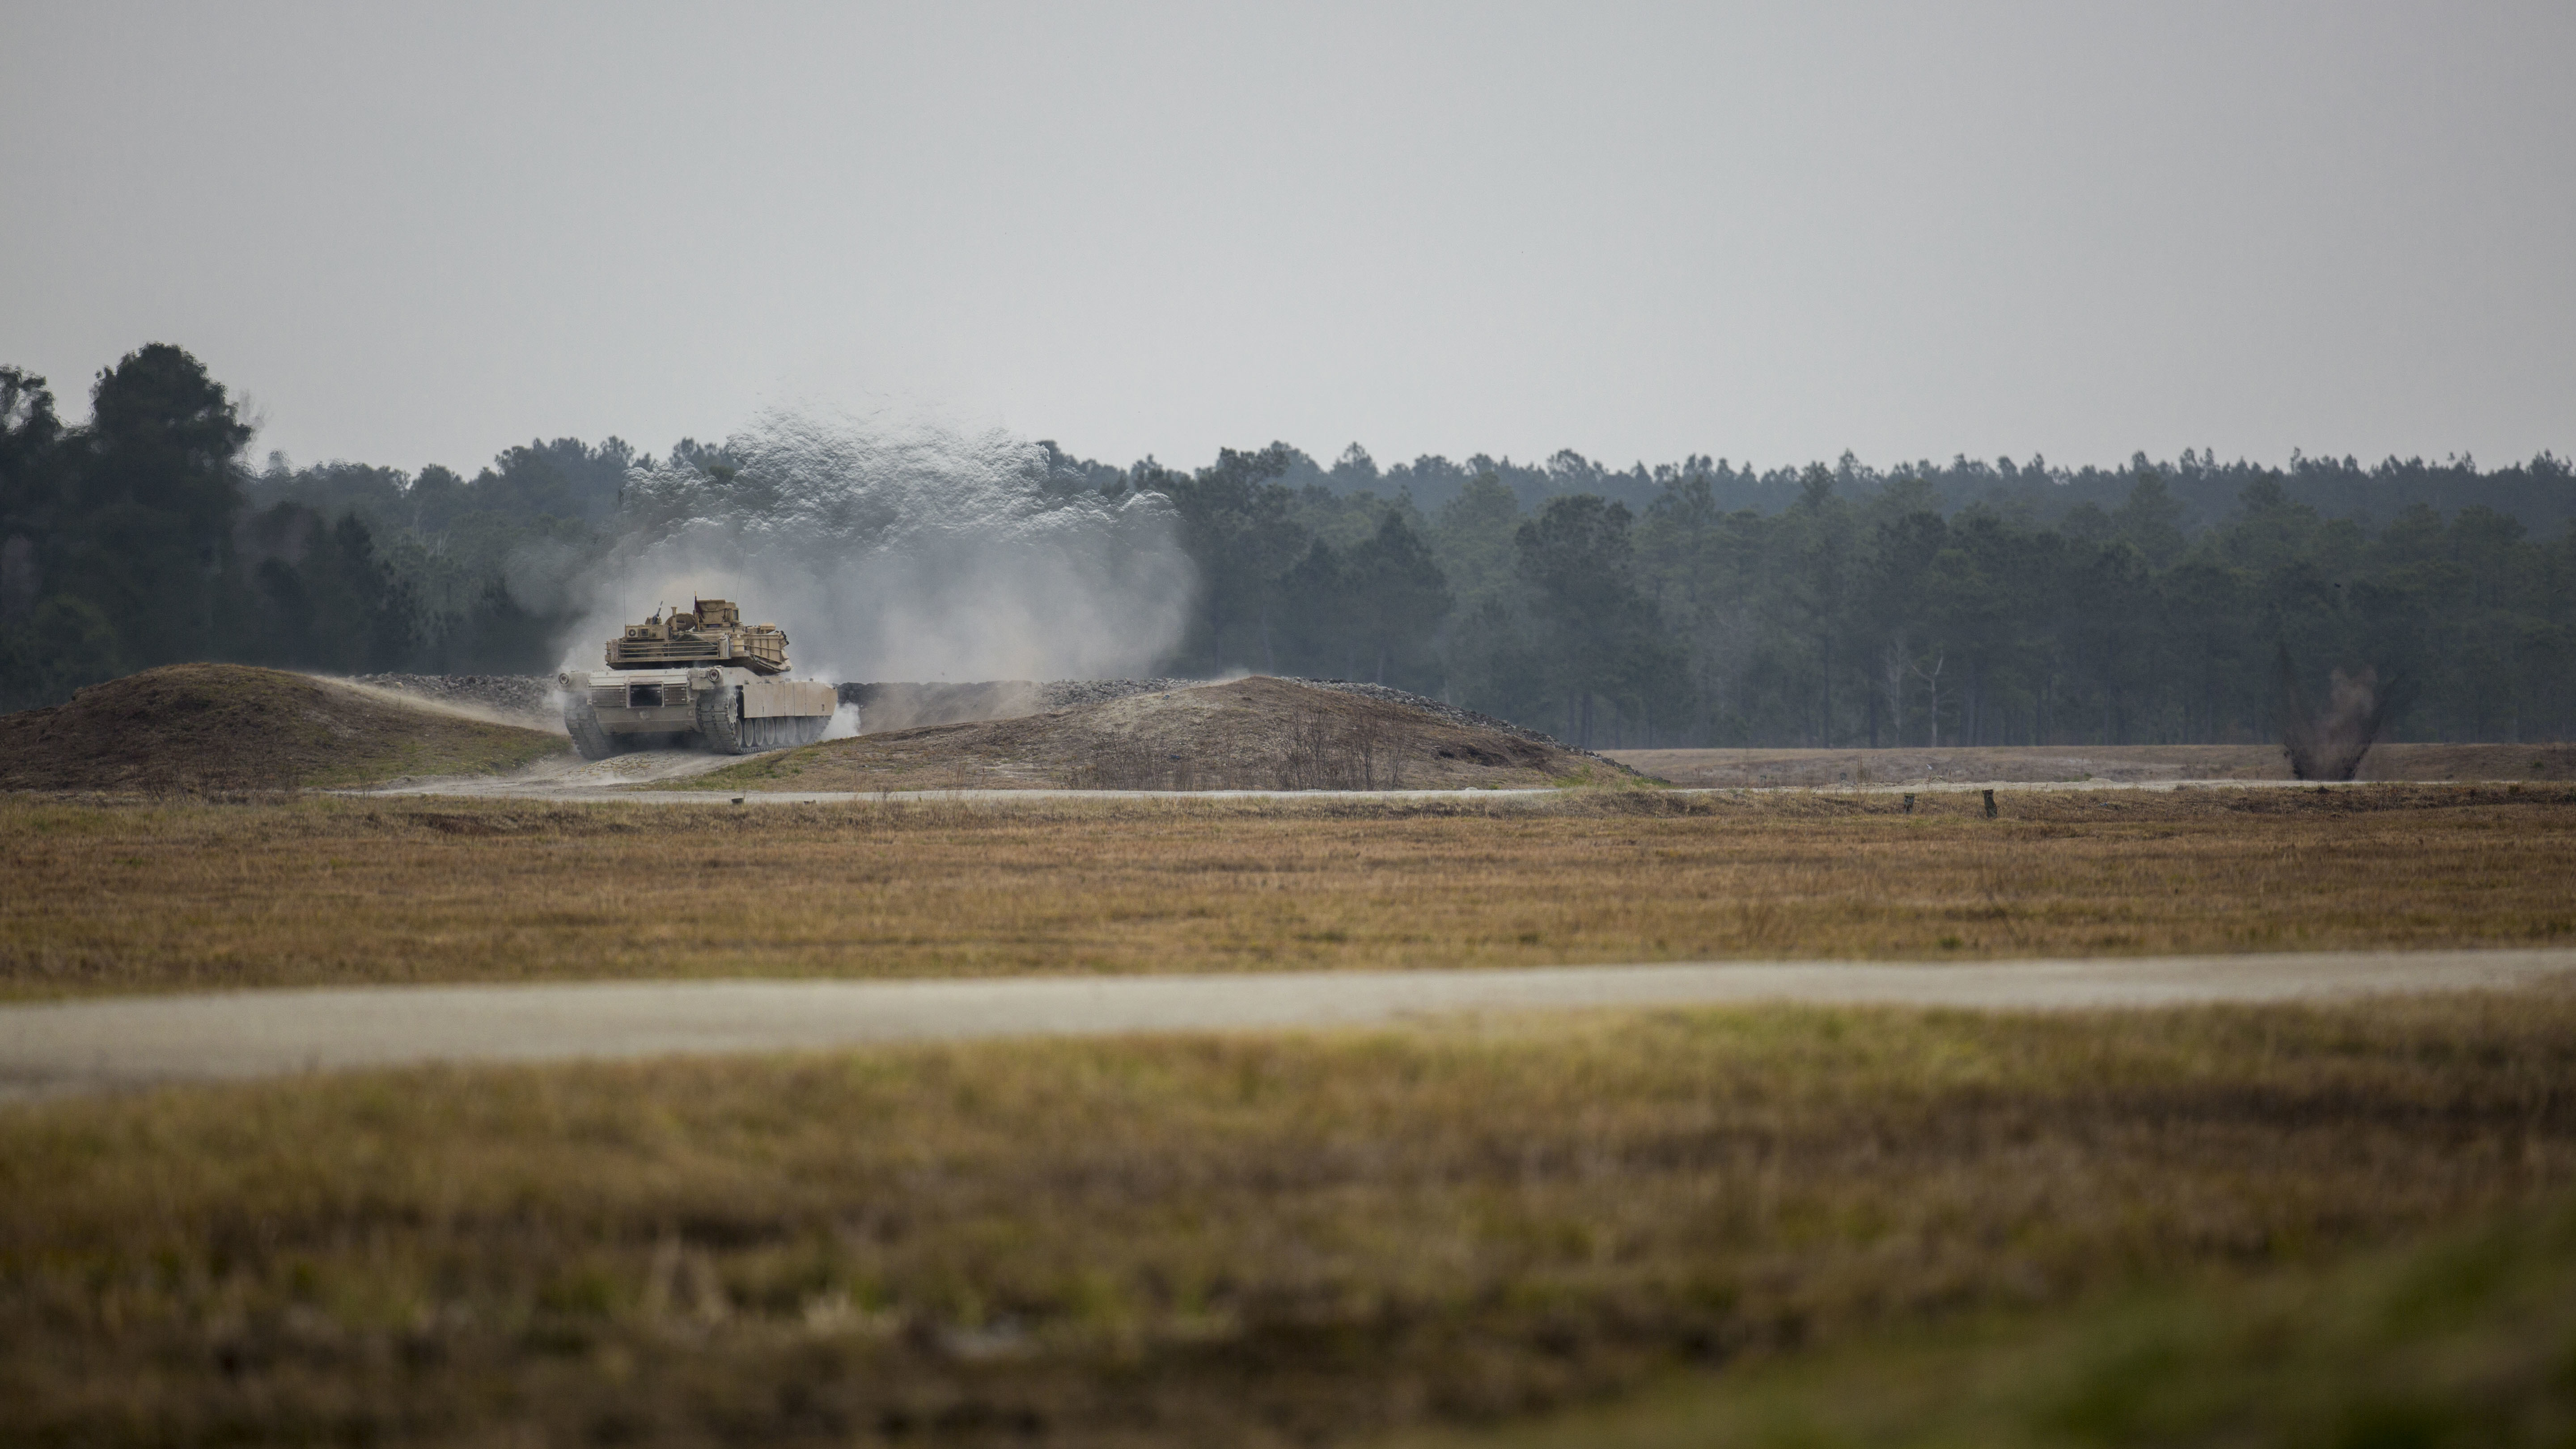 U.S. Marines with Company B, 2nd Tank Battalion, fires a 120mm smoothbore main gun from an M1A1 Abrams Main Battle Tank during a live-fire exercise at Range SR-10, Camp Lejeune, N.C., Jan. 28, 2016. 2nd Tank Battalion conducted marksmanship qualifications during a month-long field exercise. (U.S. Marine Corps photo by Lance Cpl. Judith L. Harter, MCIEAST Combat Camera/Released)